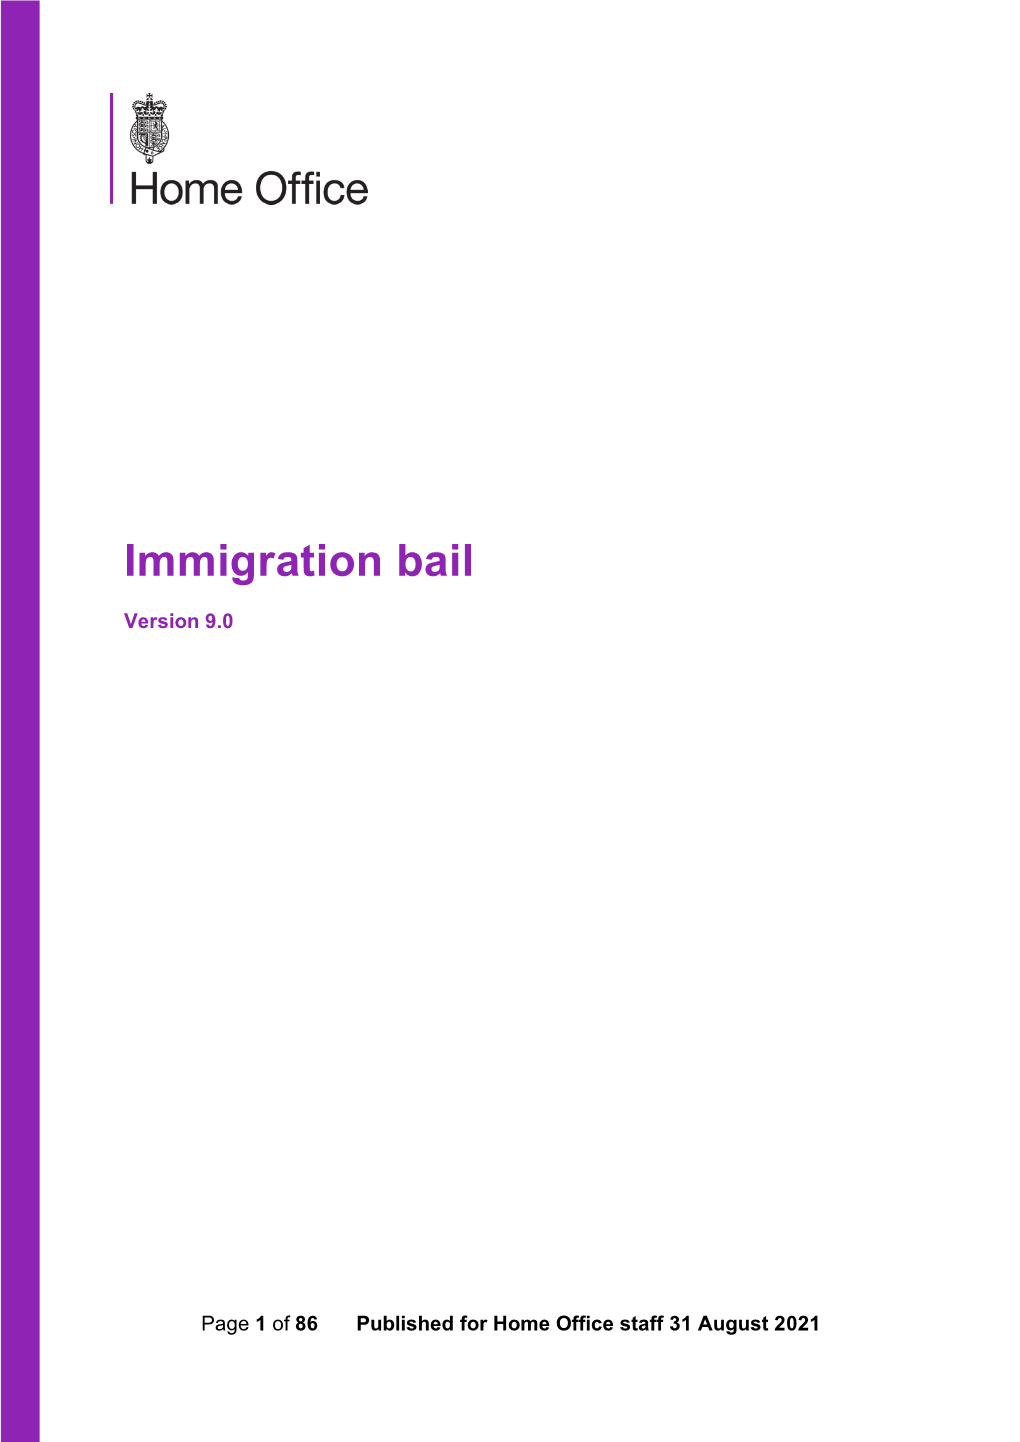 Immigration Bail and the Guidance Set out in Guidance on Immigration Bail for Judges of the First-Tier Tribunal (Immigration and Asylum Chamber)